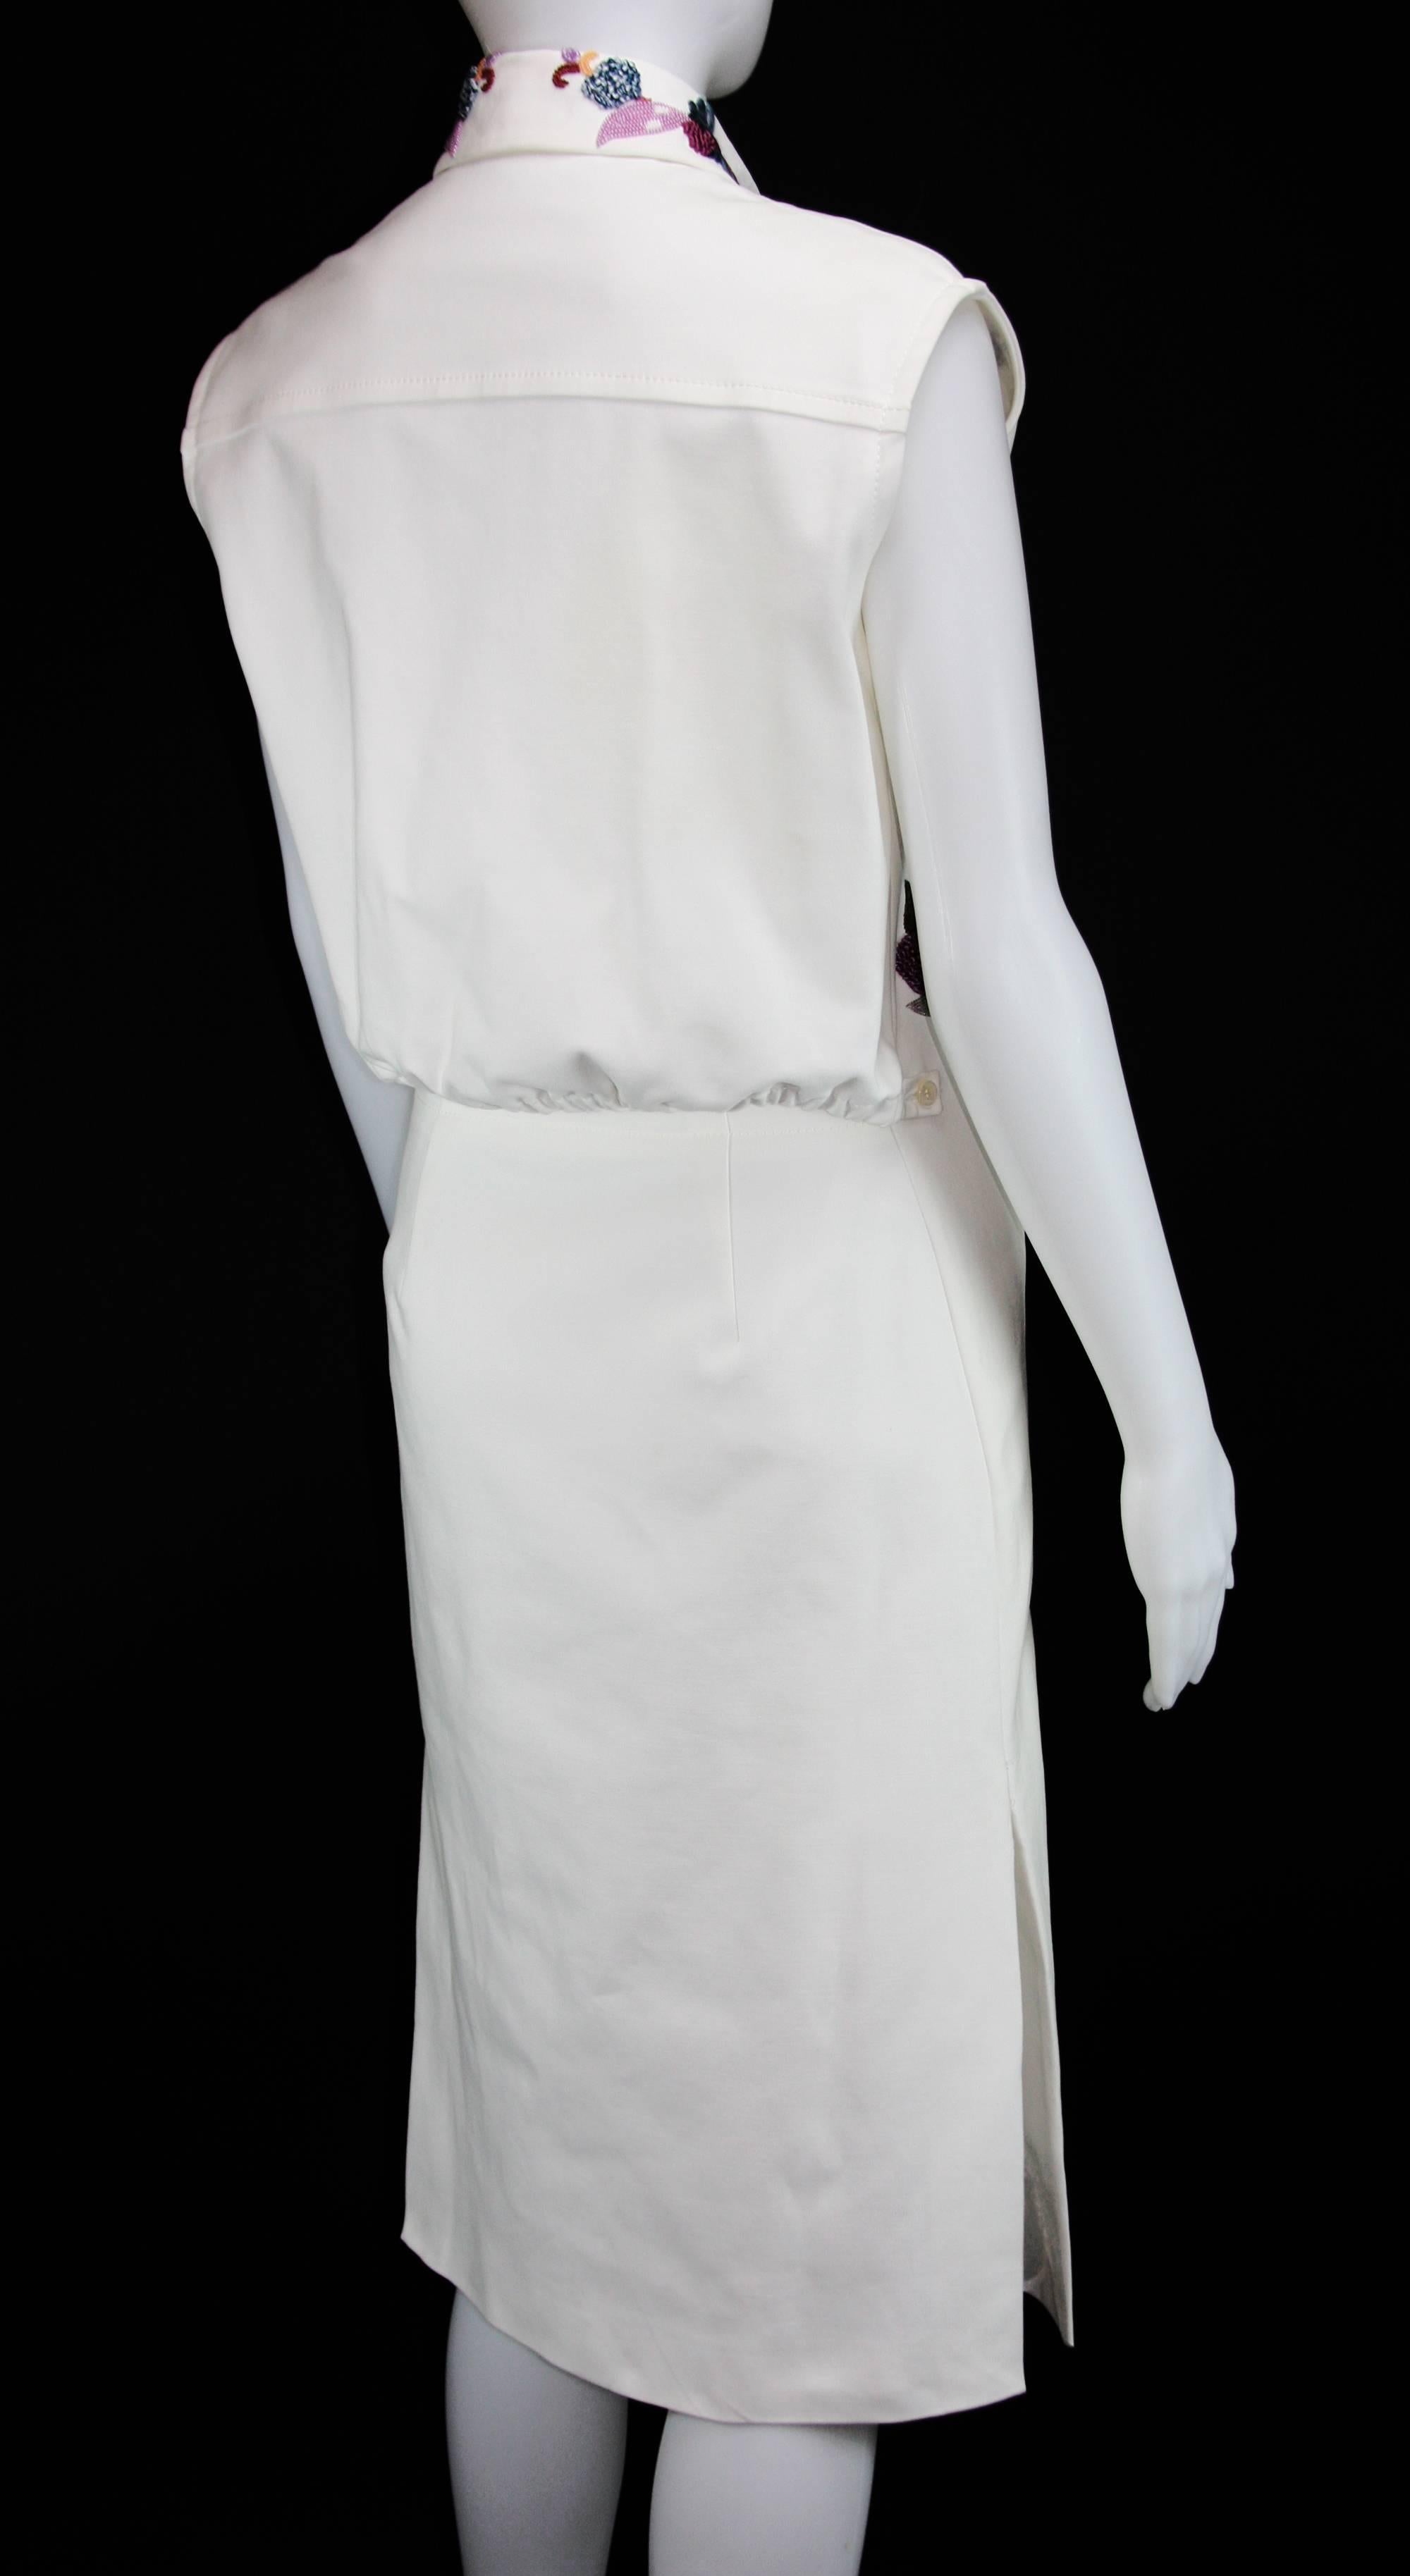 New ETRO Runway Exquisitely Hand Beaded & Embroidered White Dress w/Belt 40  6/8 4